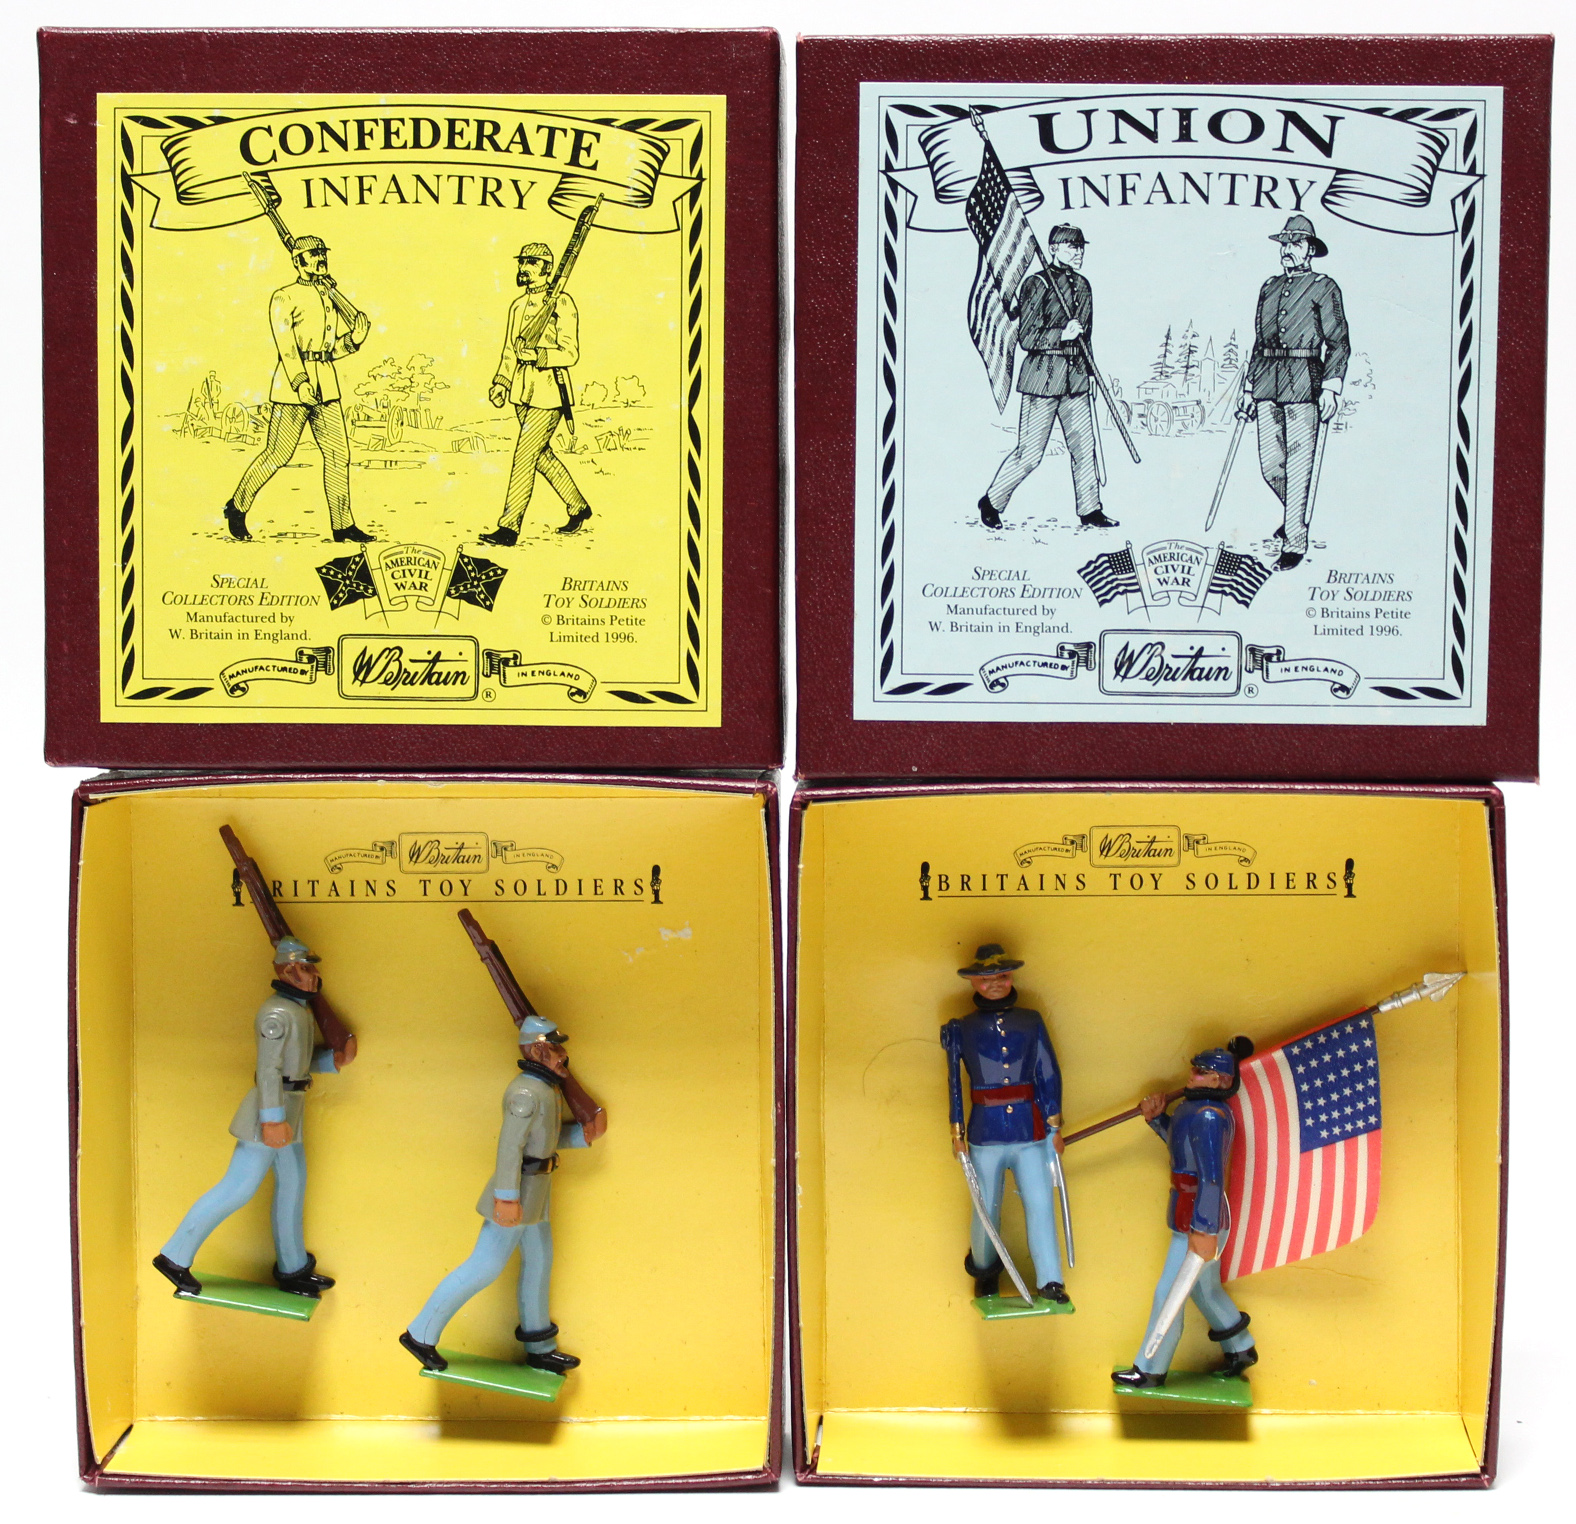 Two Britains special collector’s edition sets of figures “Confederate Infantry”, & “Union Infantry”,